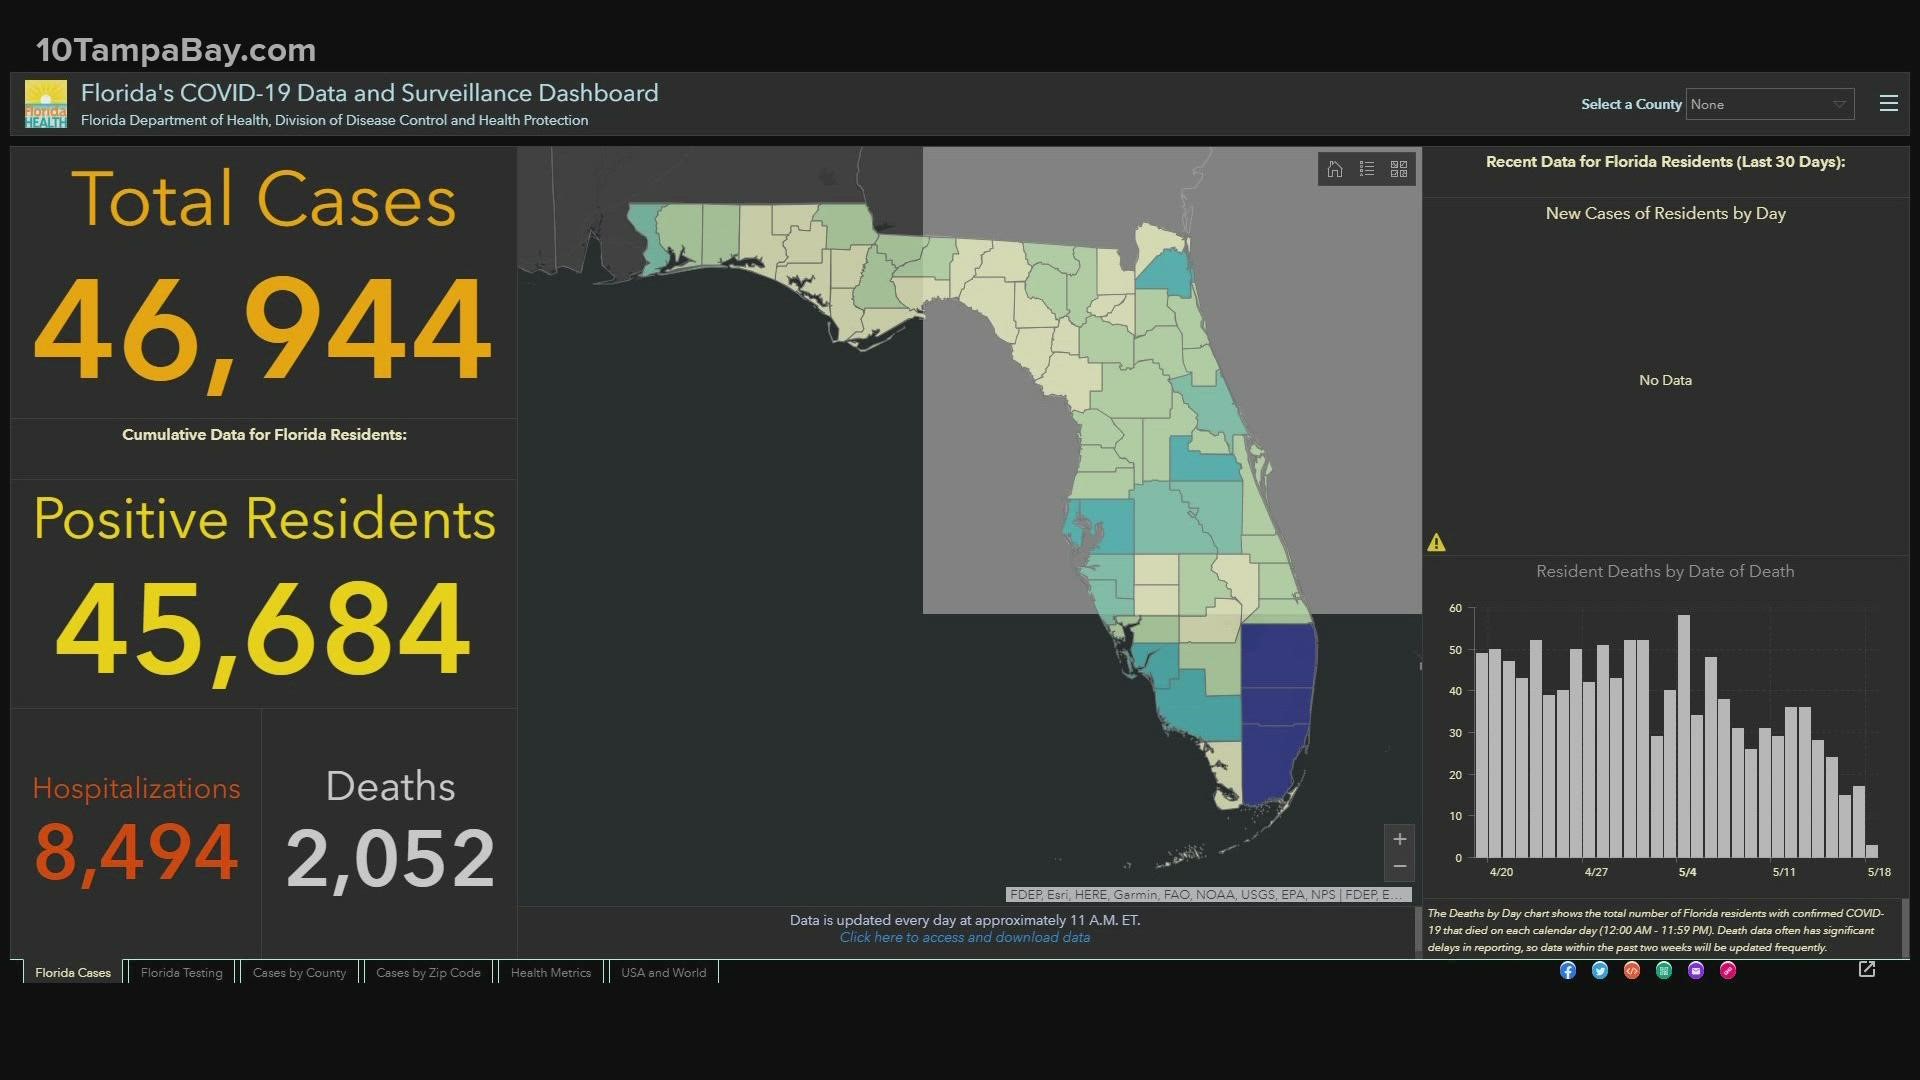 Florida unfortunately has become the epicenter for COVID-19 as cases and hospitalizations continue to rise.